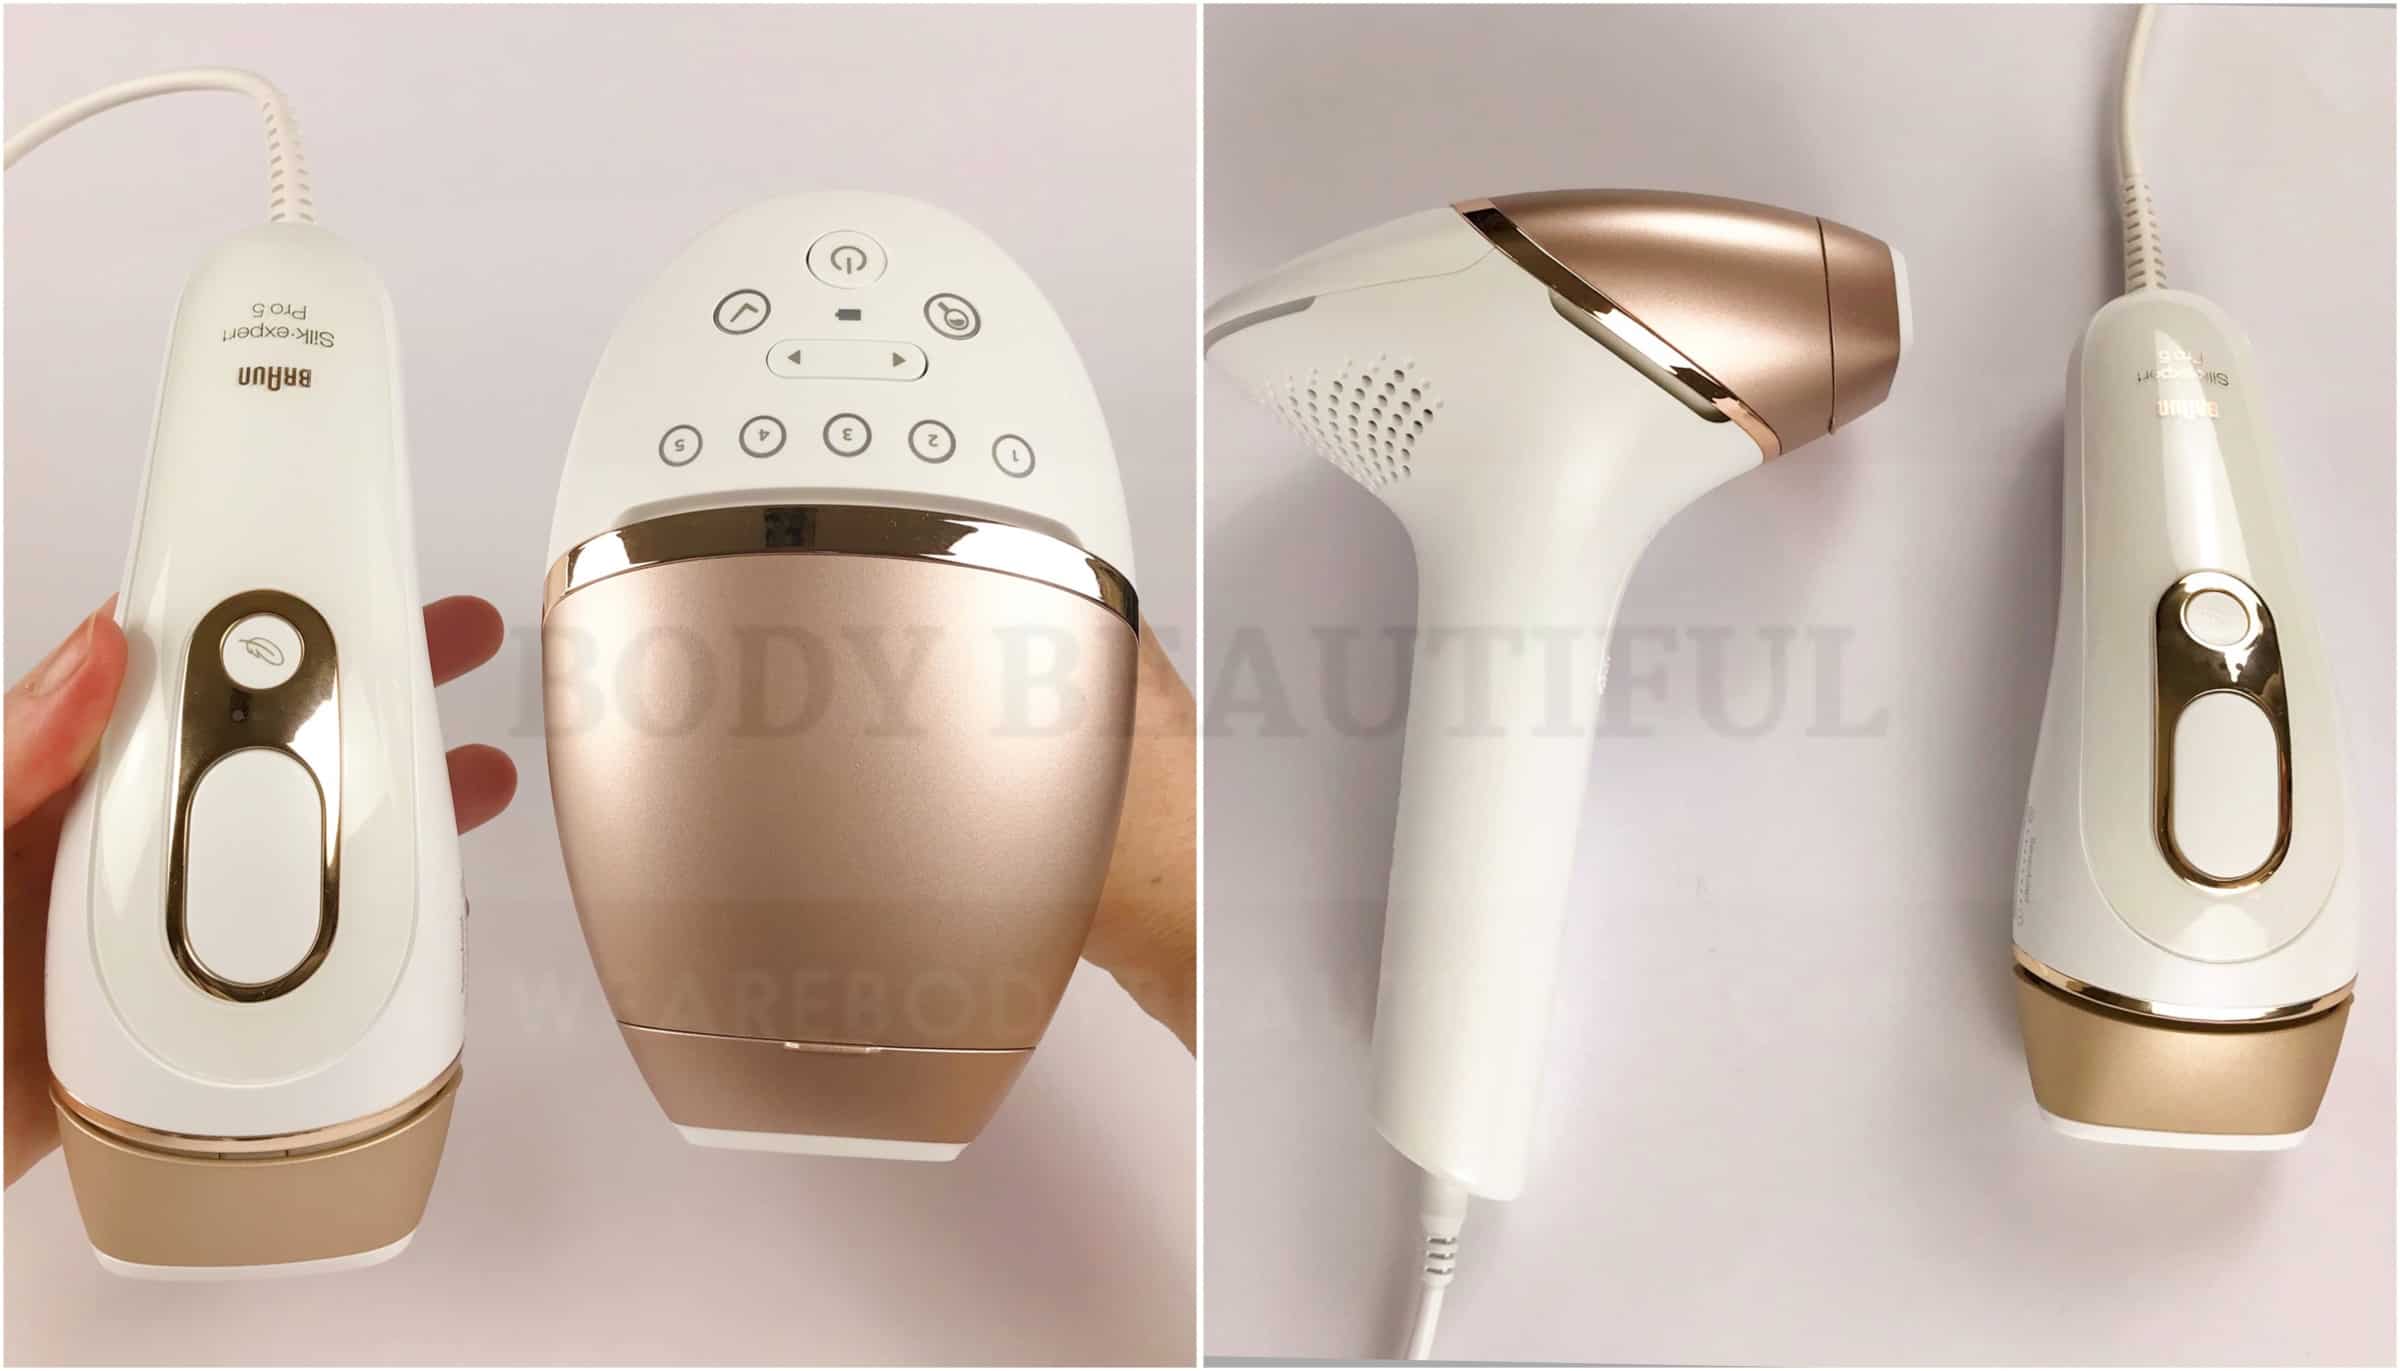 Philips Lumea Prestige vs Braun Pro 5 IPL: the best home IPL hair removal compared by WeAreBodyBeautiful experts